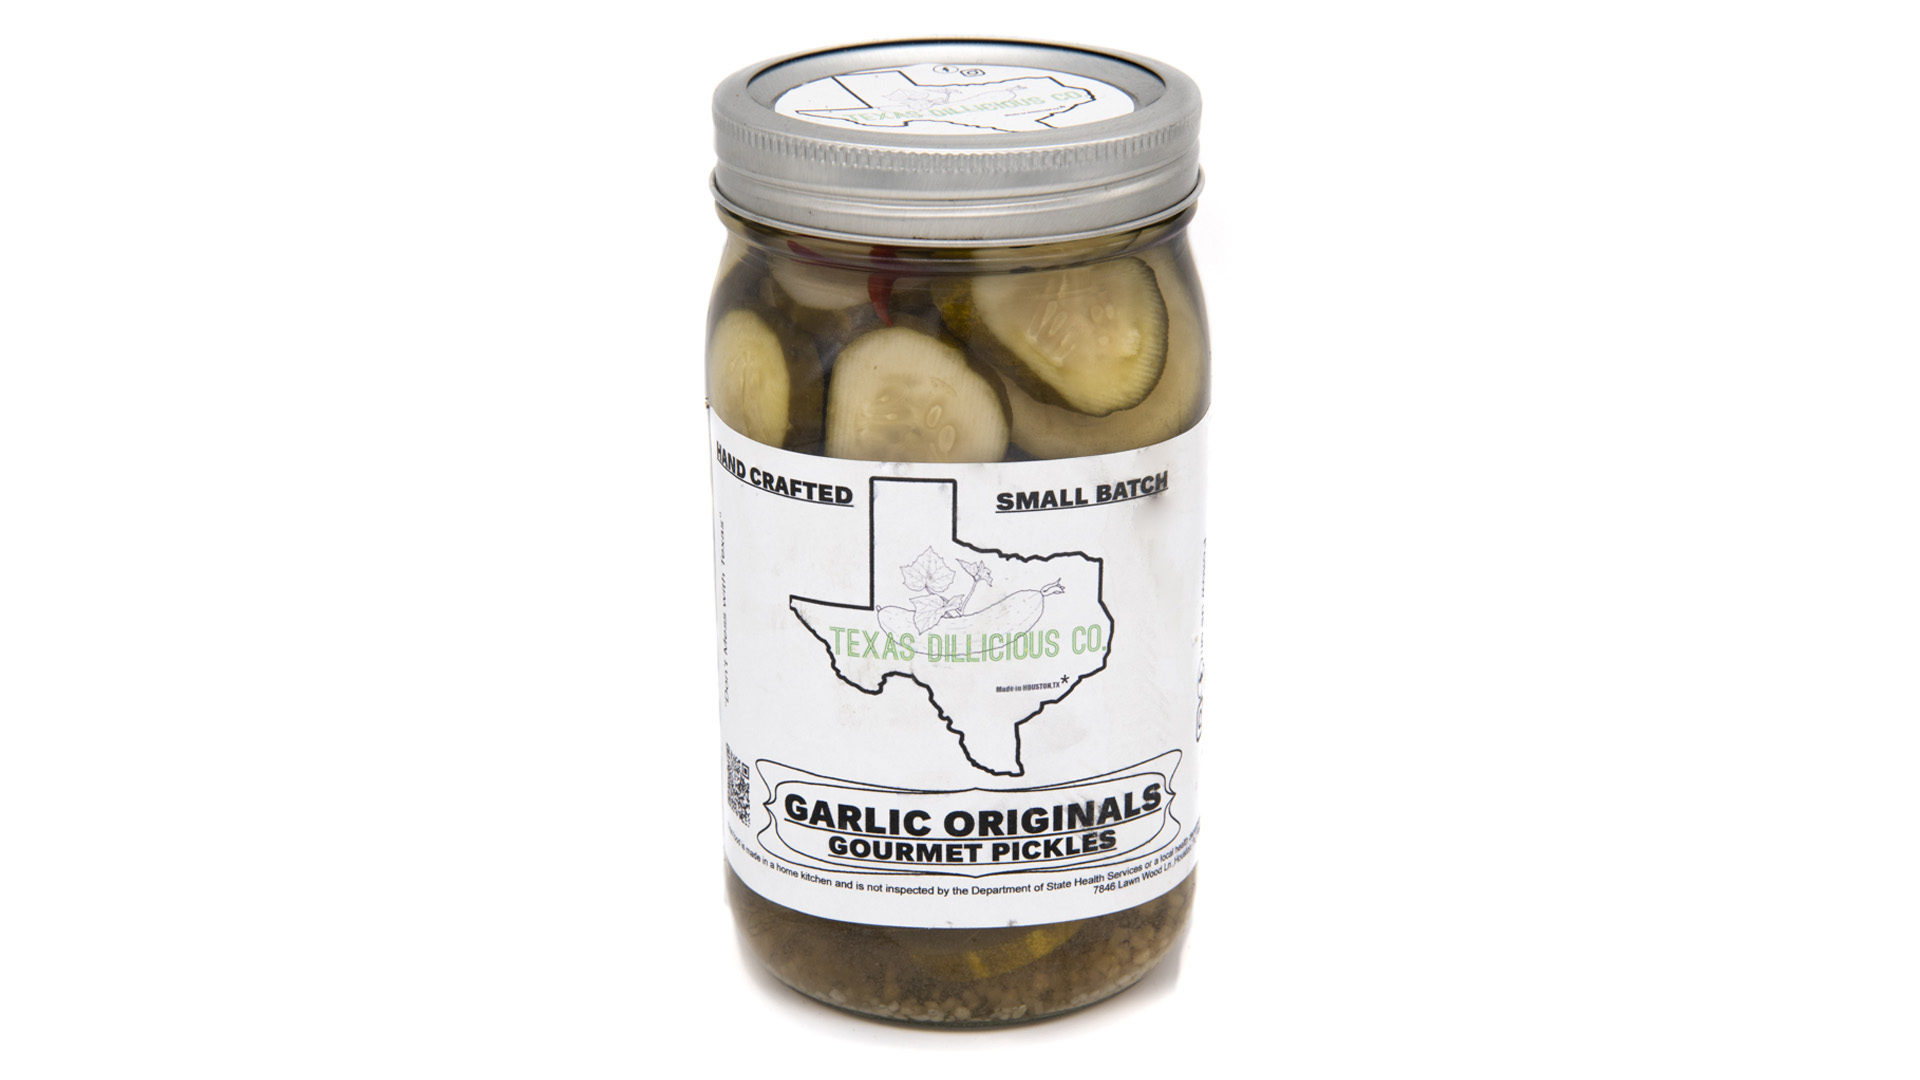 Boars Night Out Garlic Double Butter White Lightning - 5 Pound Bag with Complimentary 16 Ounce Shaker Jar